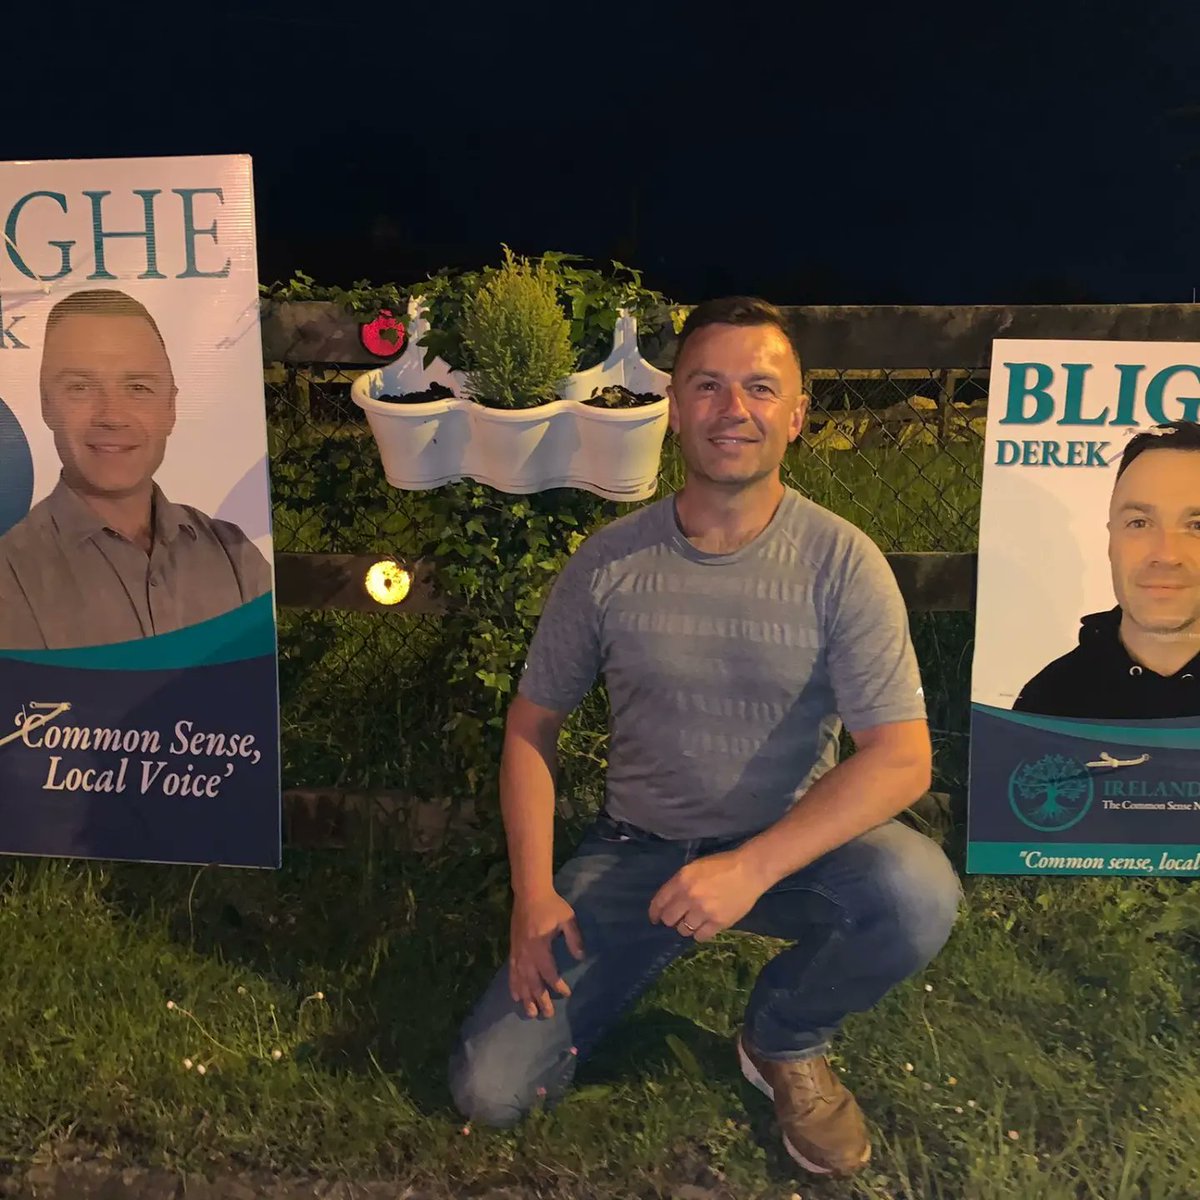 I stayed out until the early hours hanging posters Wed night/Thurs morning, Approximately 50% of them have been cut down and stolen. How can someone run a legitimate campaign with this kind of interference?